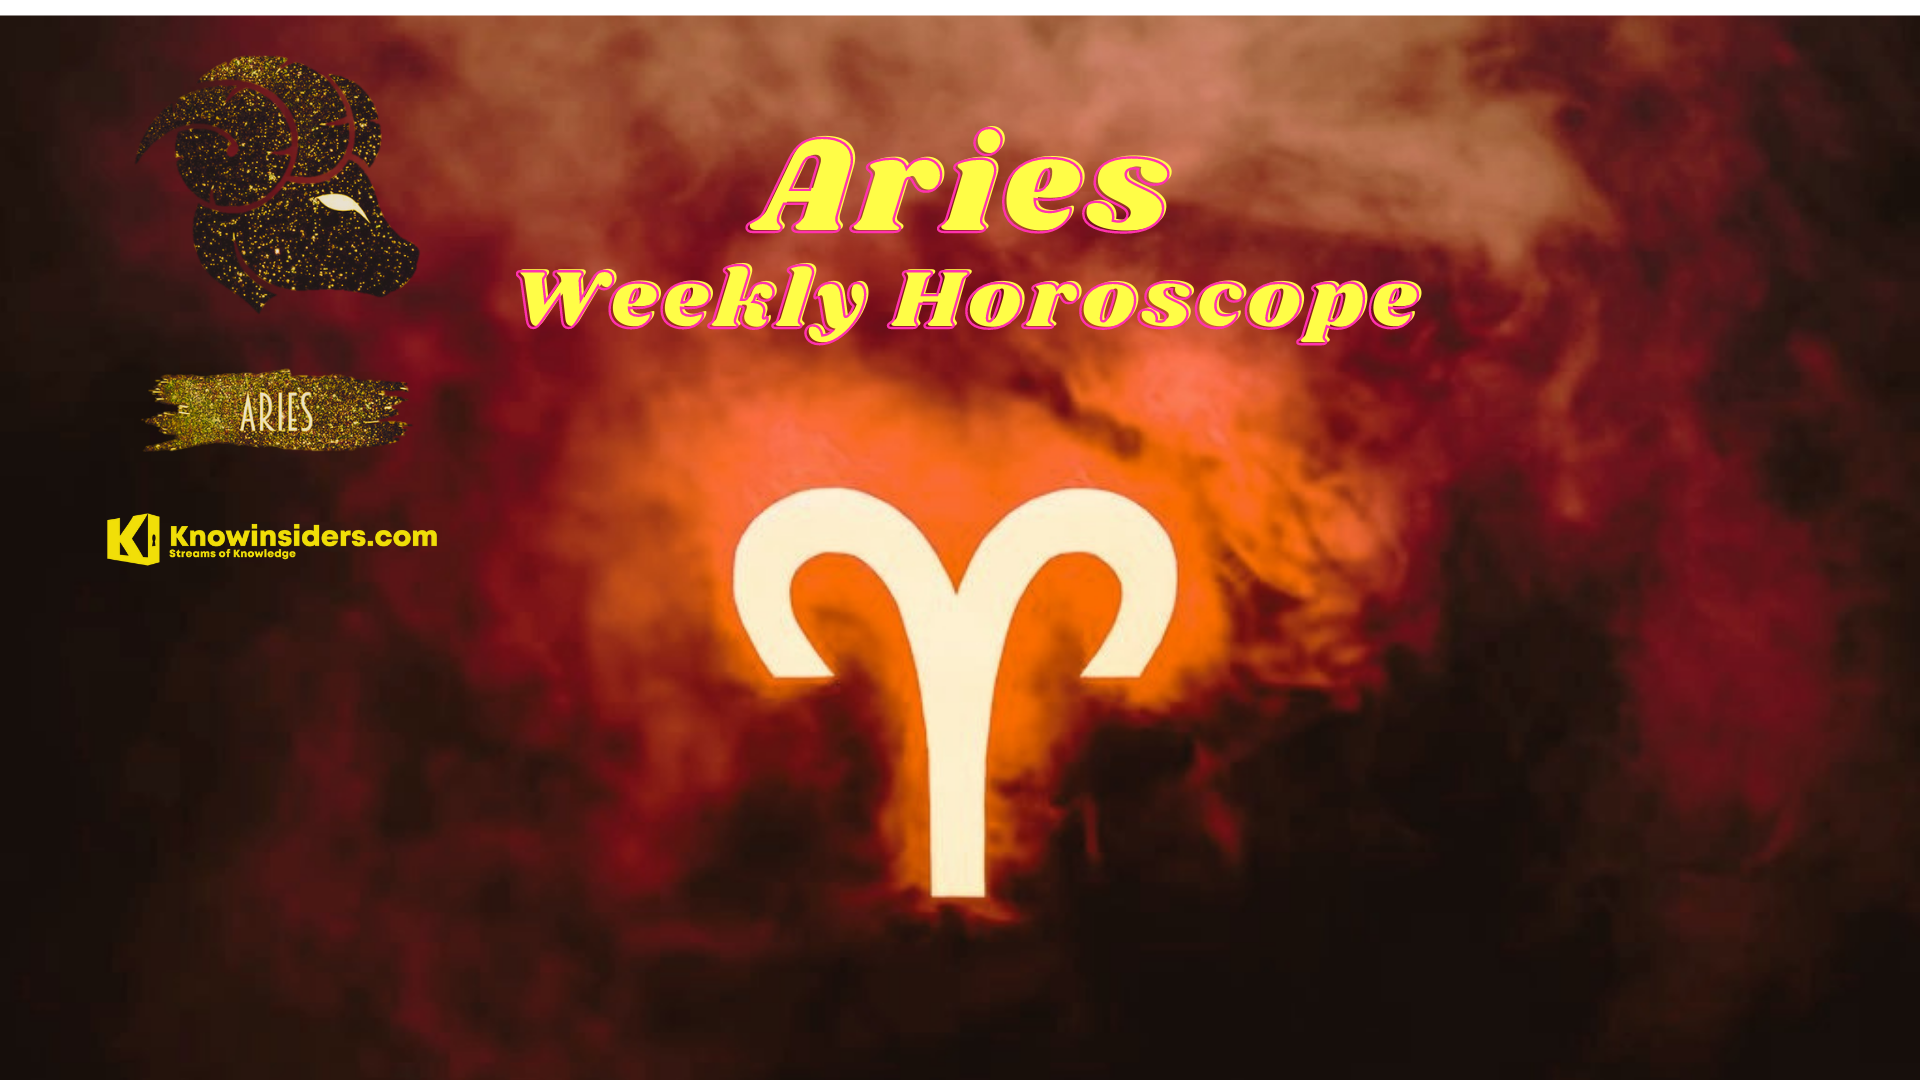 ARIES Weekly Horoscope 9 to 8 August 2021: Prediction for Love, Money, Health and Career